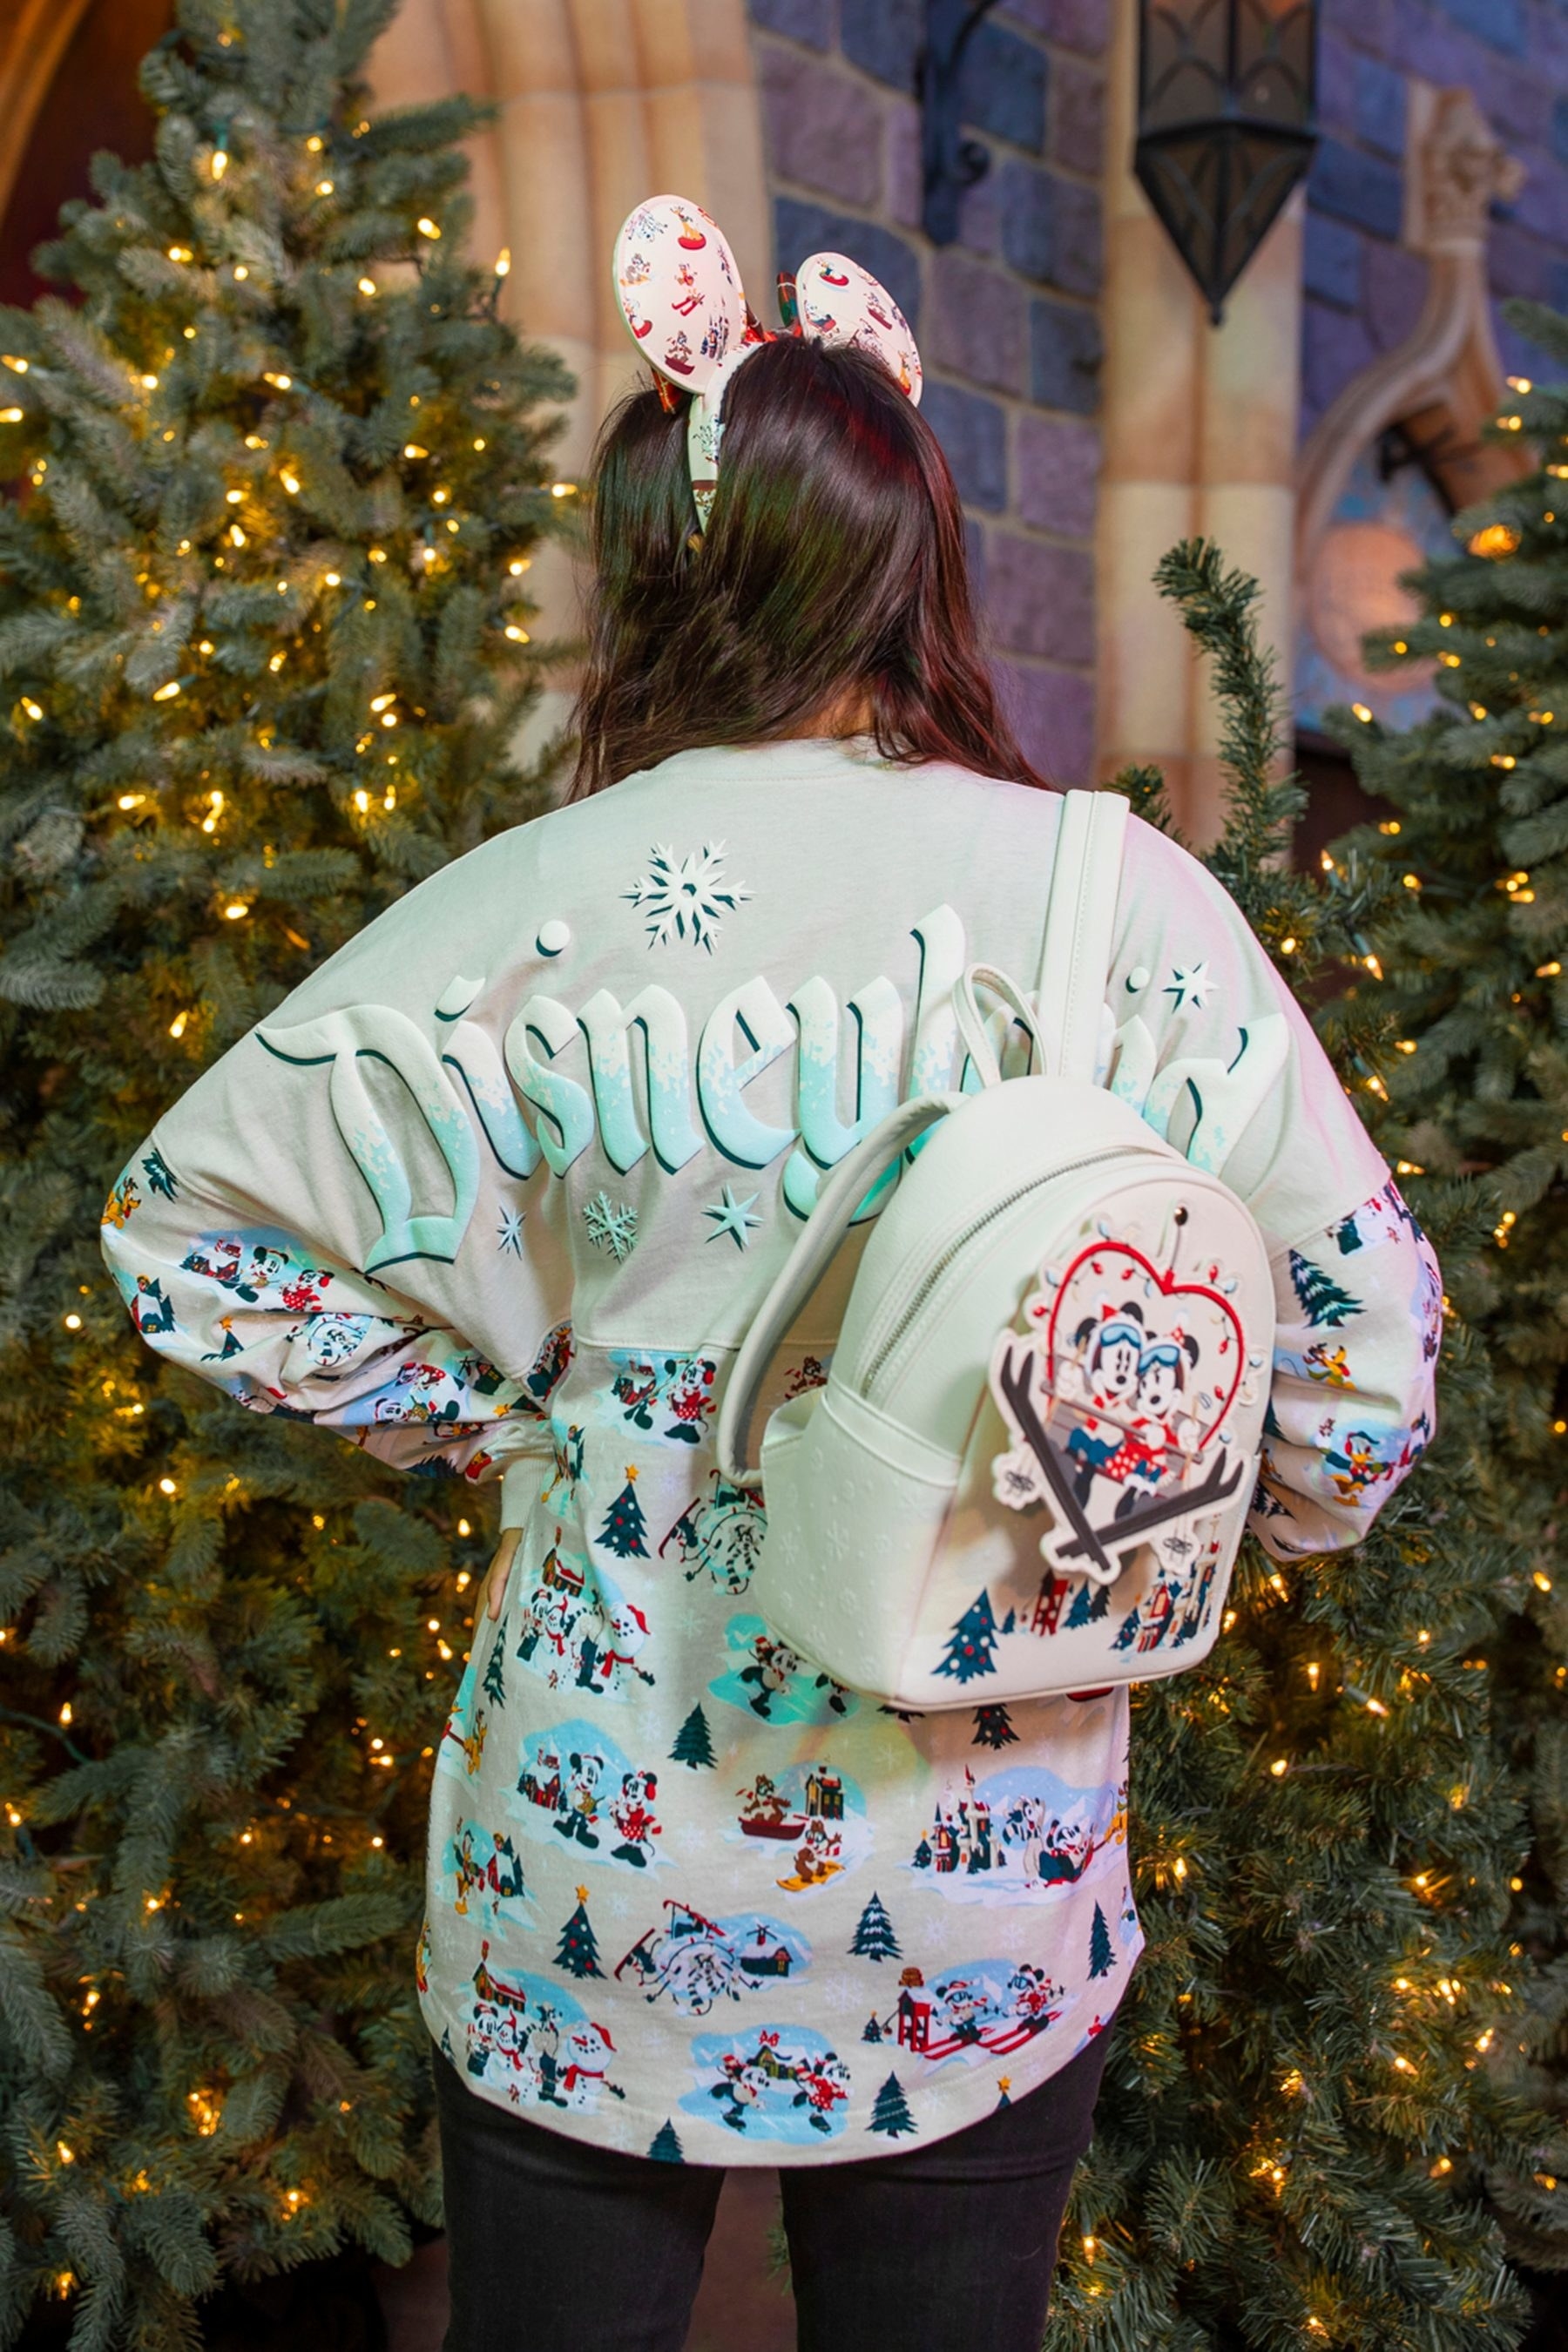 A white spirit jersey with winter scenes printed on it and a Disneyland logo across the back